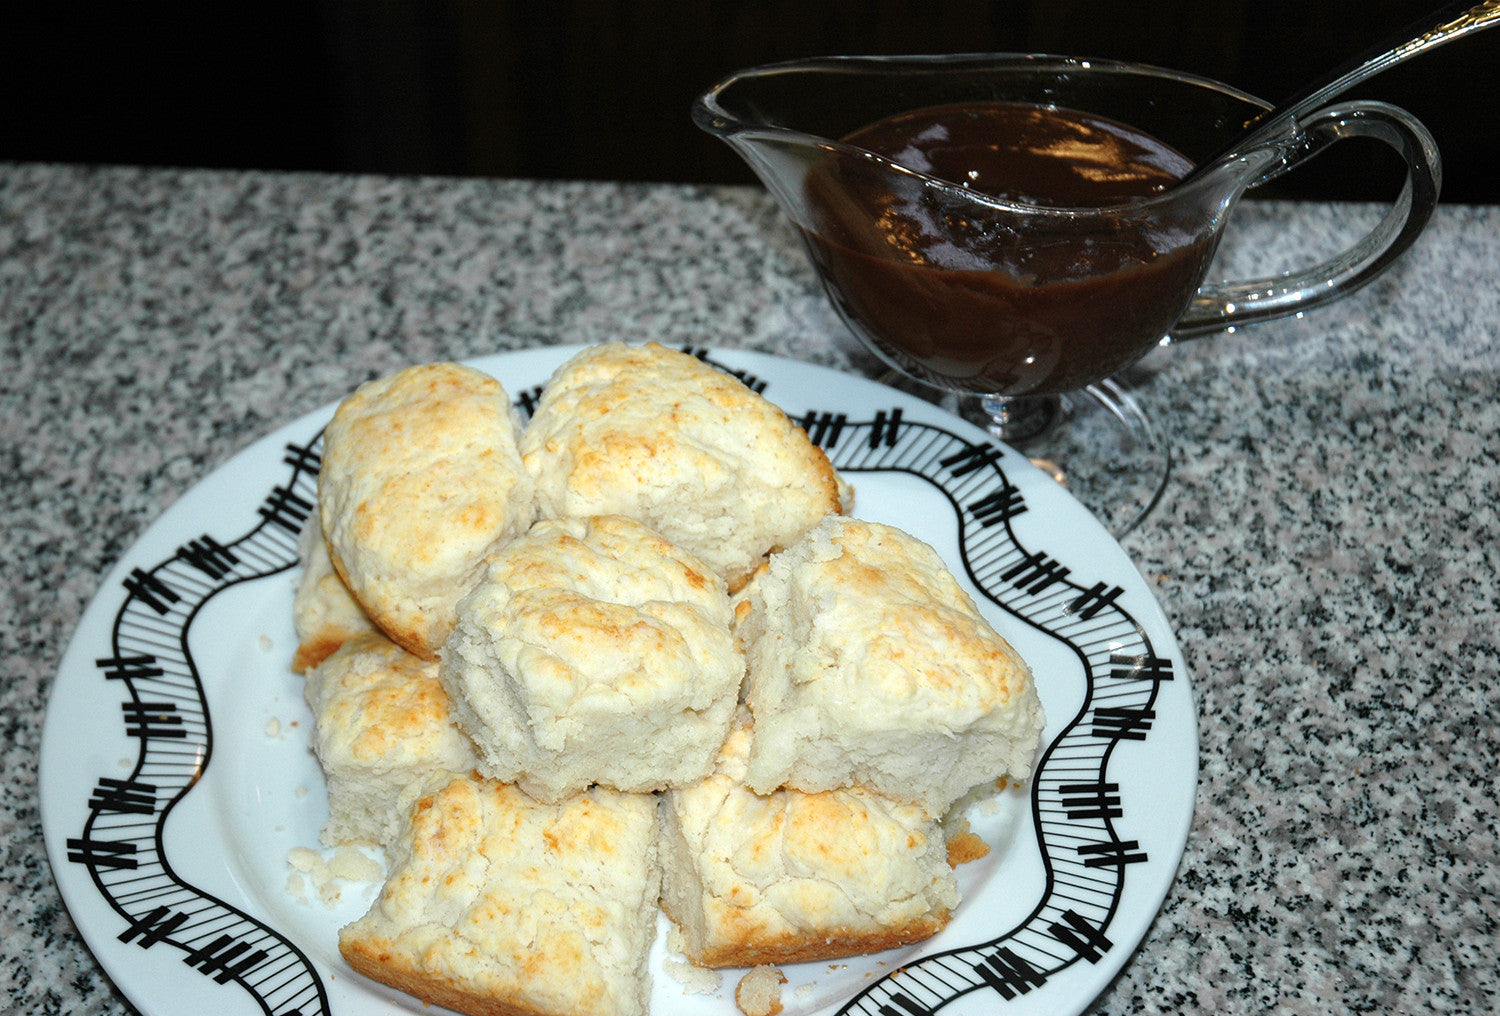 Meeting Isaac Hayes - Angel Biscuits with Chocolate Gravy